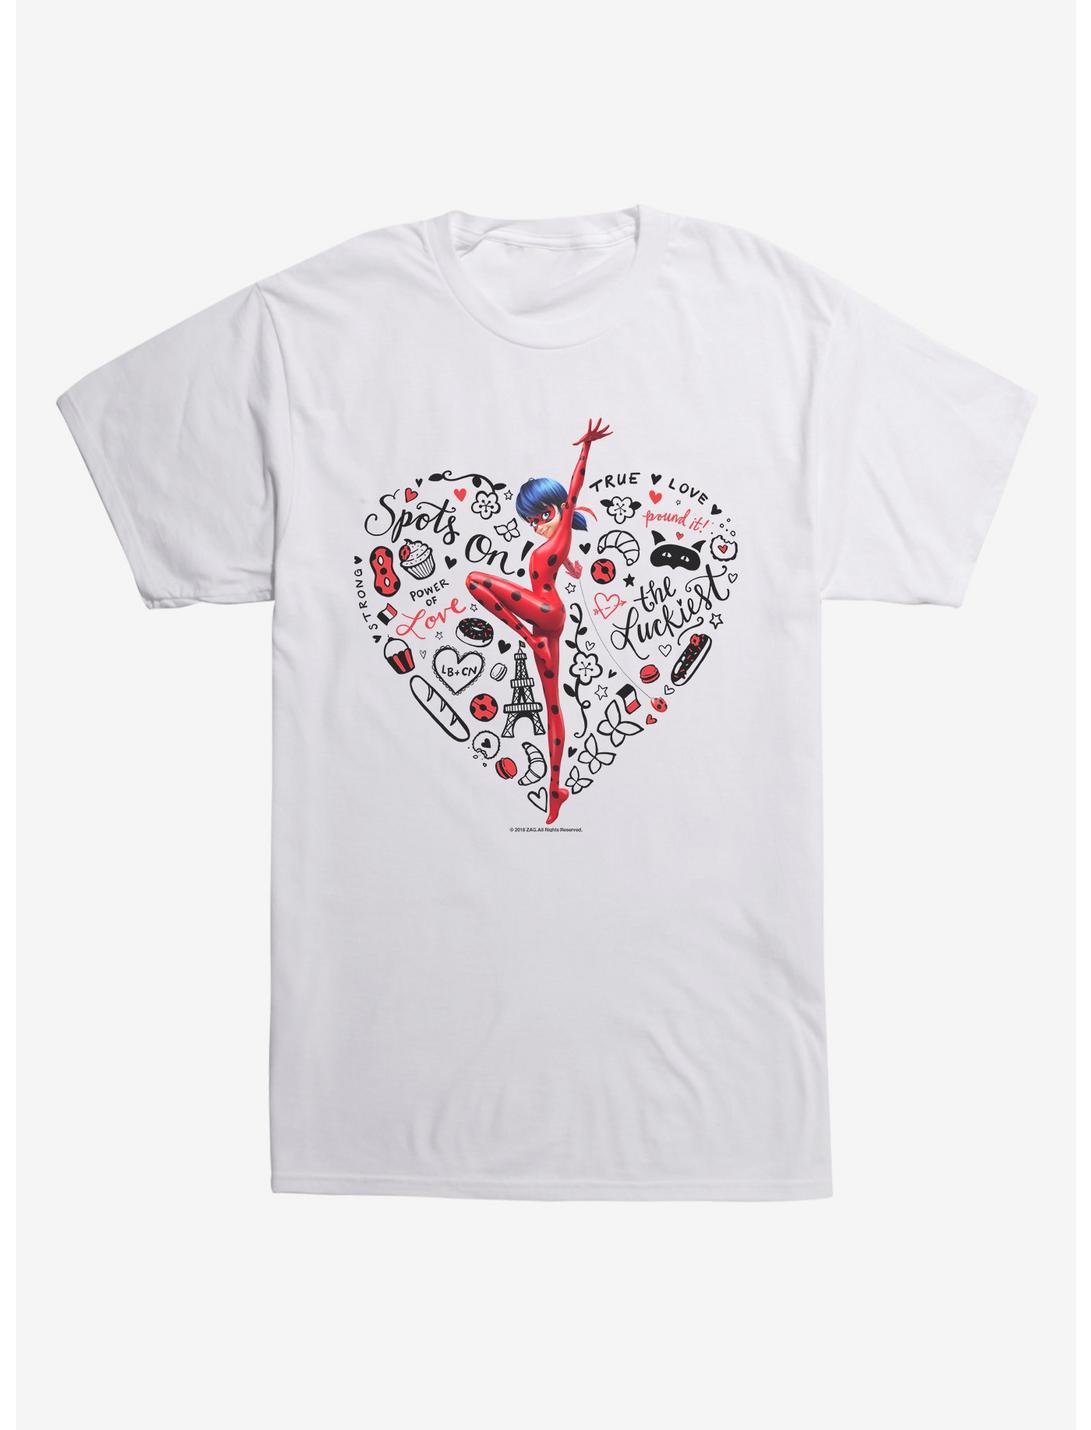 Extra Soft Miraculous: Tales of Ladybug & Cat Noir Heart Collage T-Shirt, WHITE, hi-res